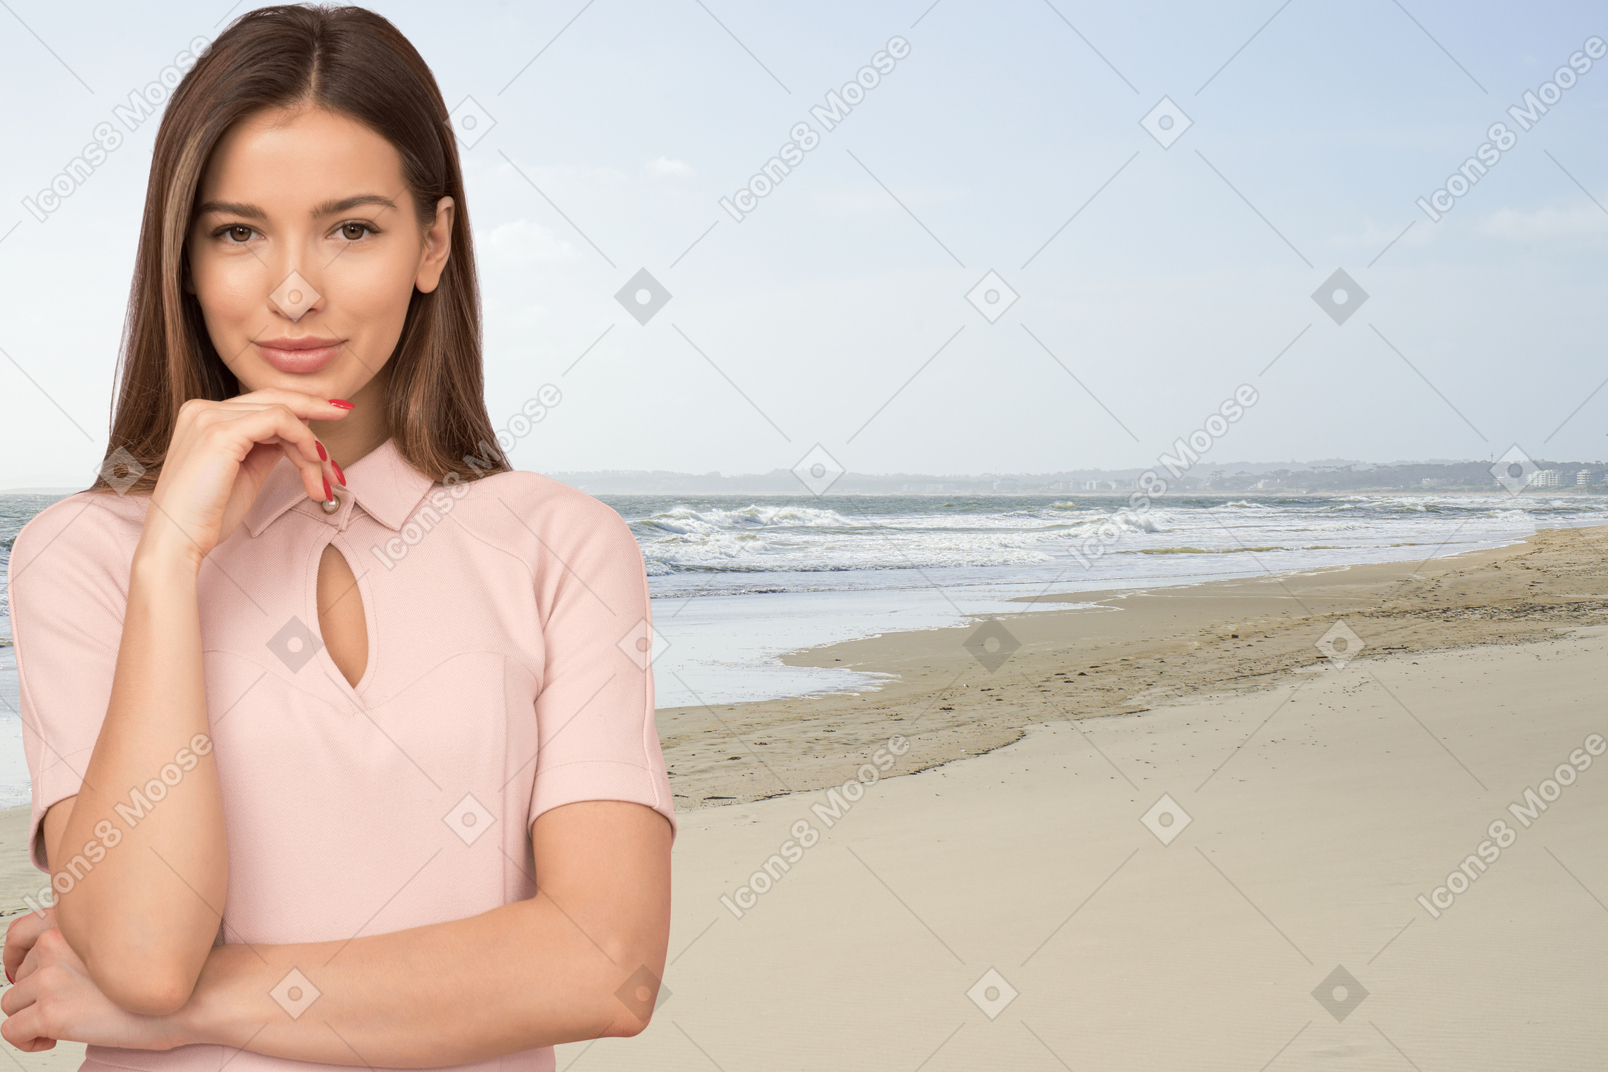 A woman standing on a beach next to the ocean